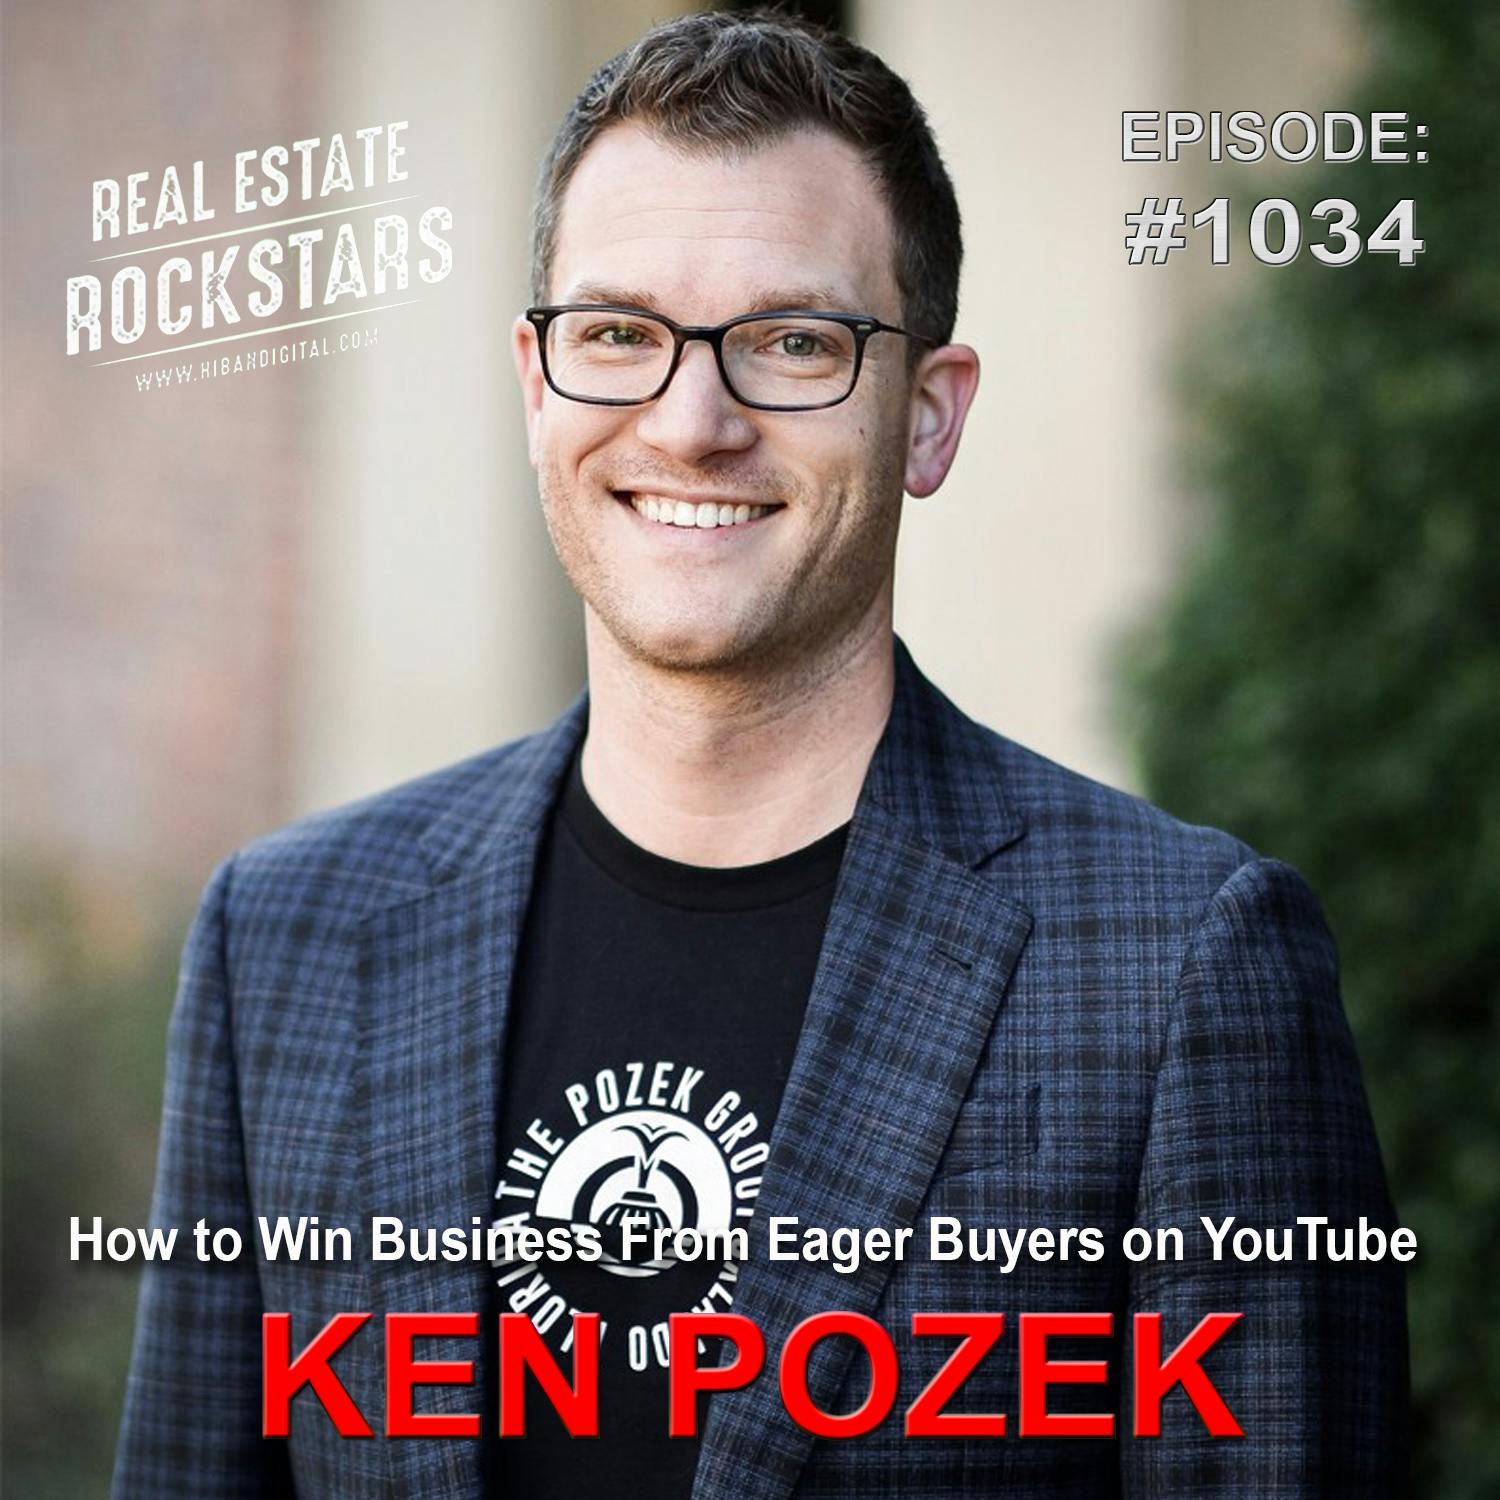 1034: How to Win Business From Eager Buyers on YouTube - Ken Pozek